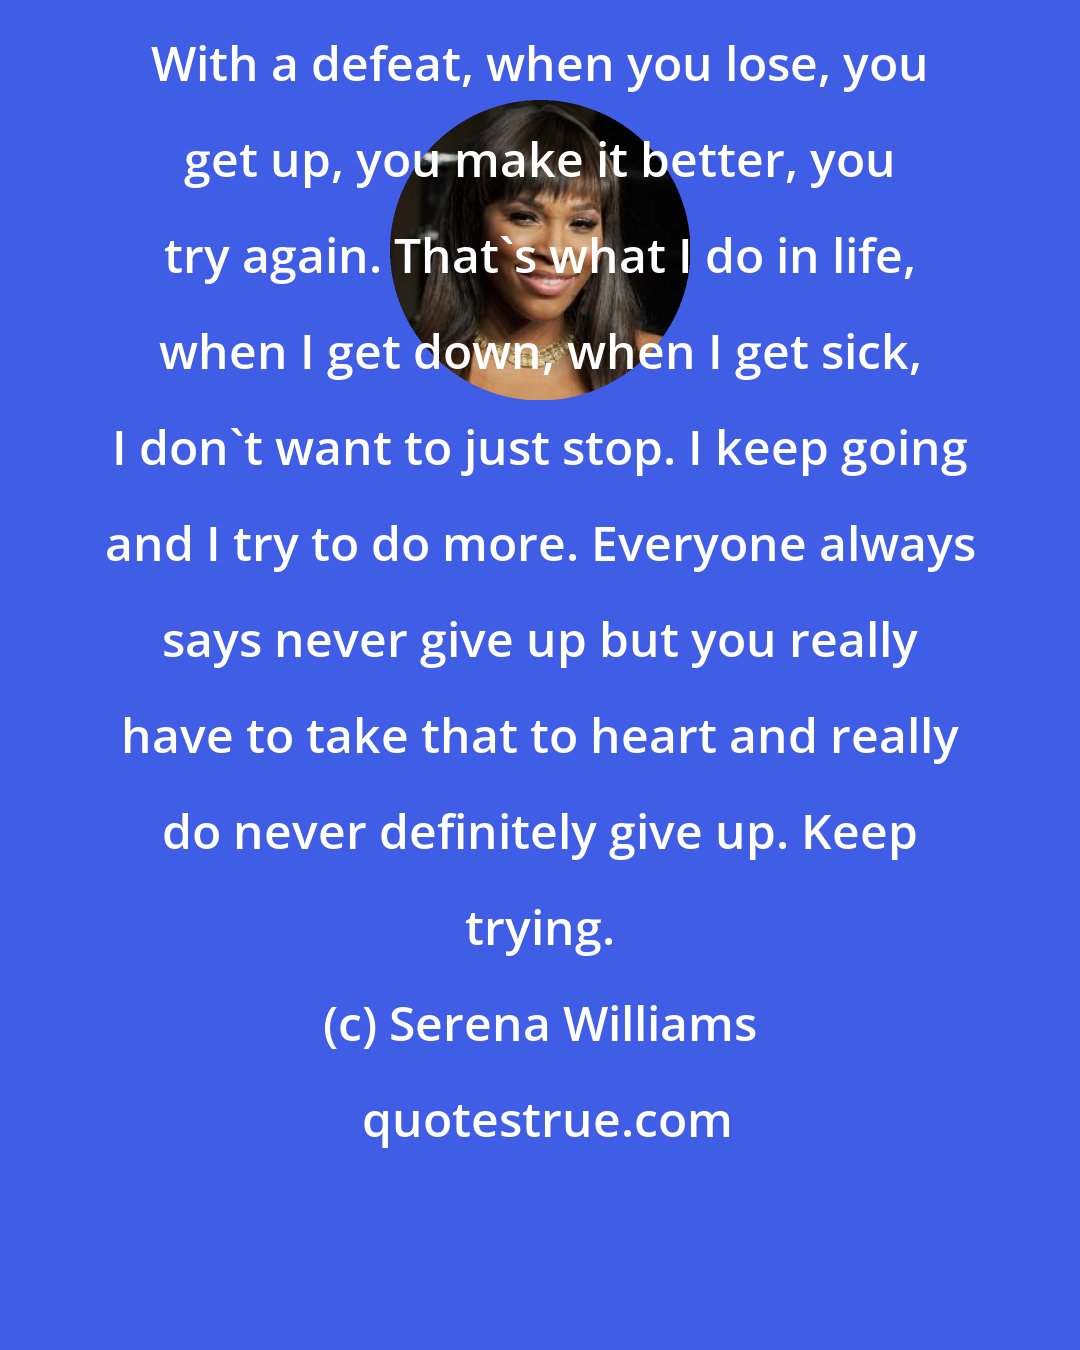 Serena Williams: With a defeat, when you lose, you get up, you make it better, you try again. That's what I do in life, when I get down, when I get sick, I don't want to just stop. I keep going and I try to do more. Everyone always says never give up but you really have to take that to heart and really do never definitely give up. Keep trying.